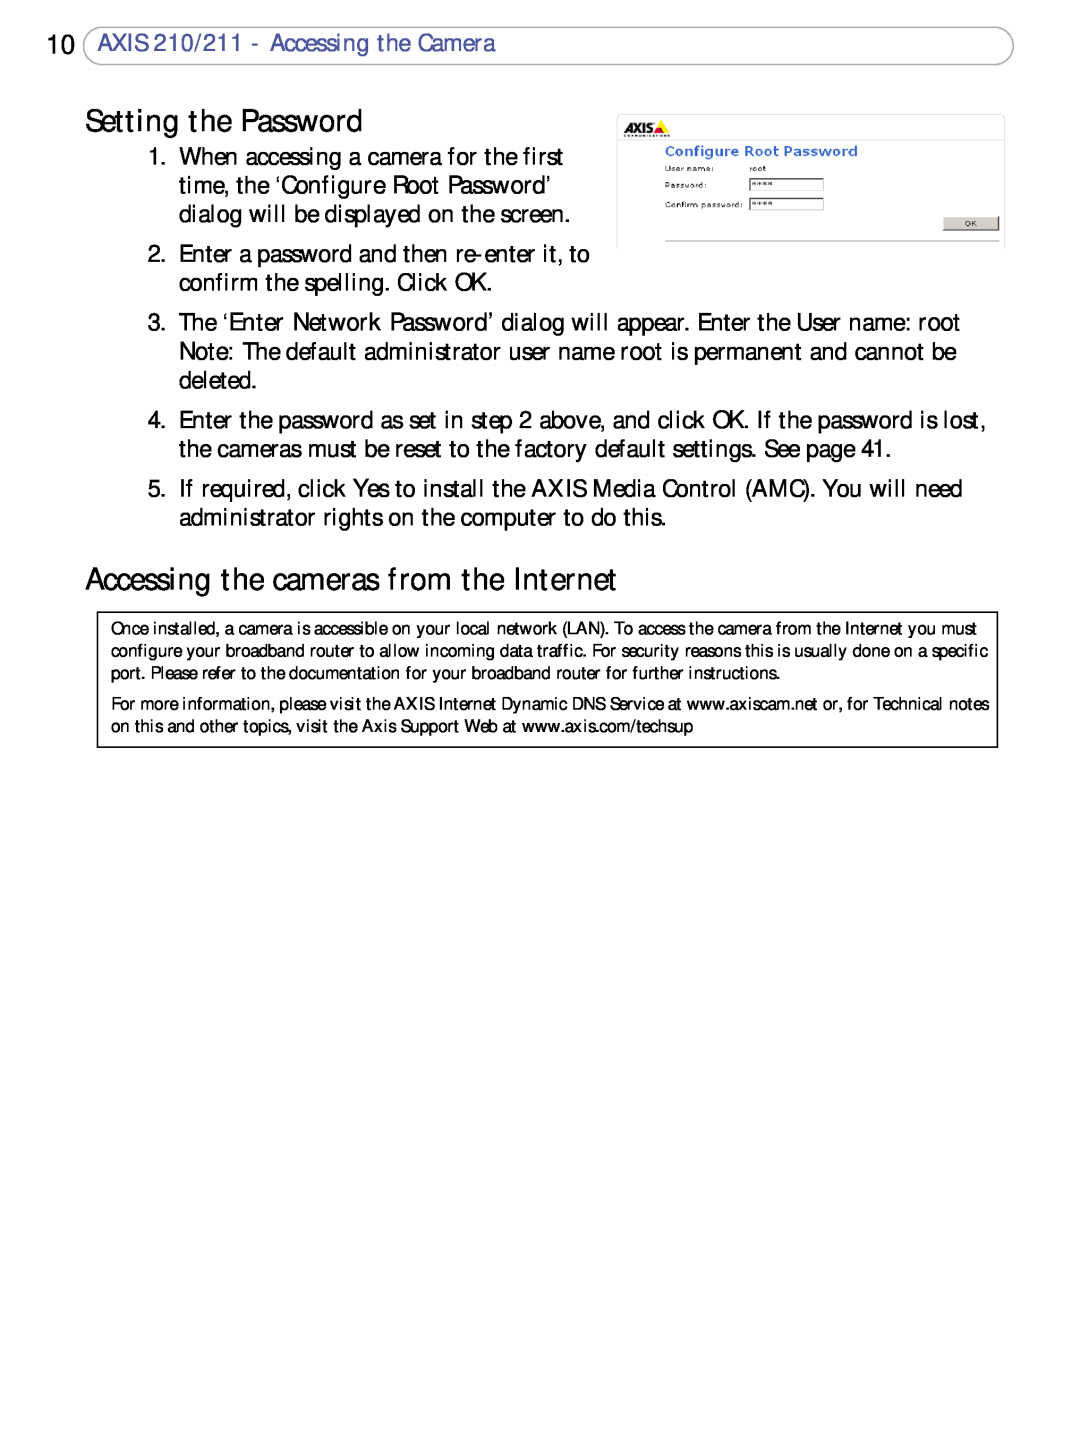 Axis Communications 210/211 user manual Setting the Password, Accessing the cameras from the Internet 